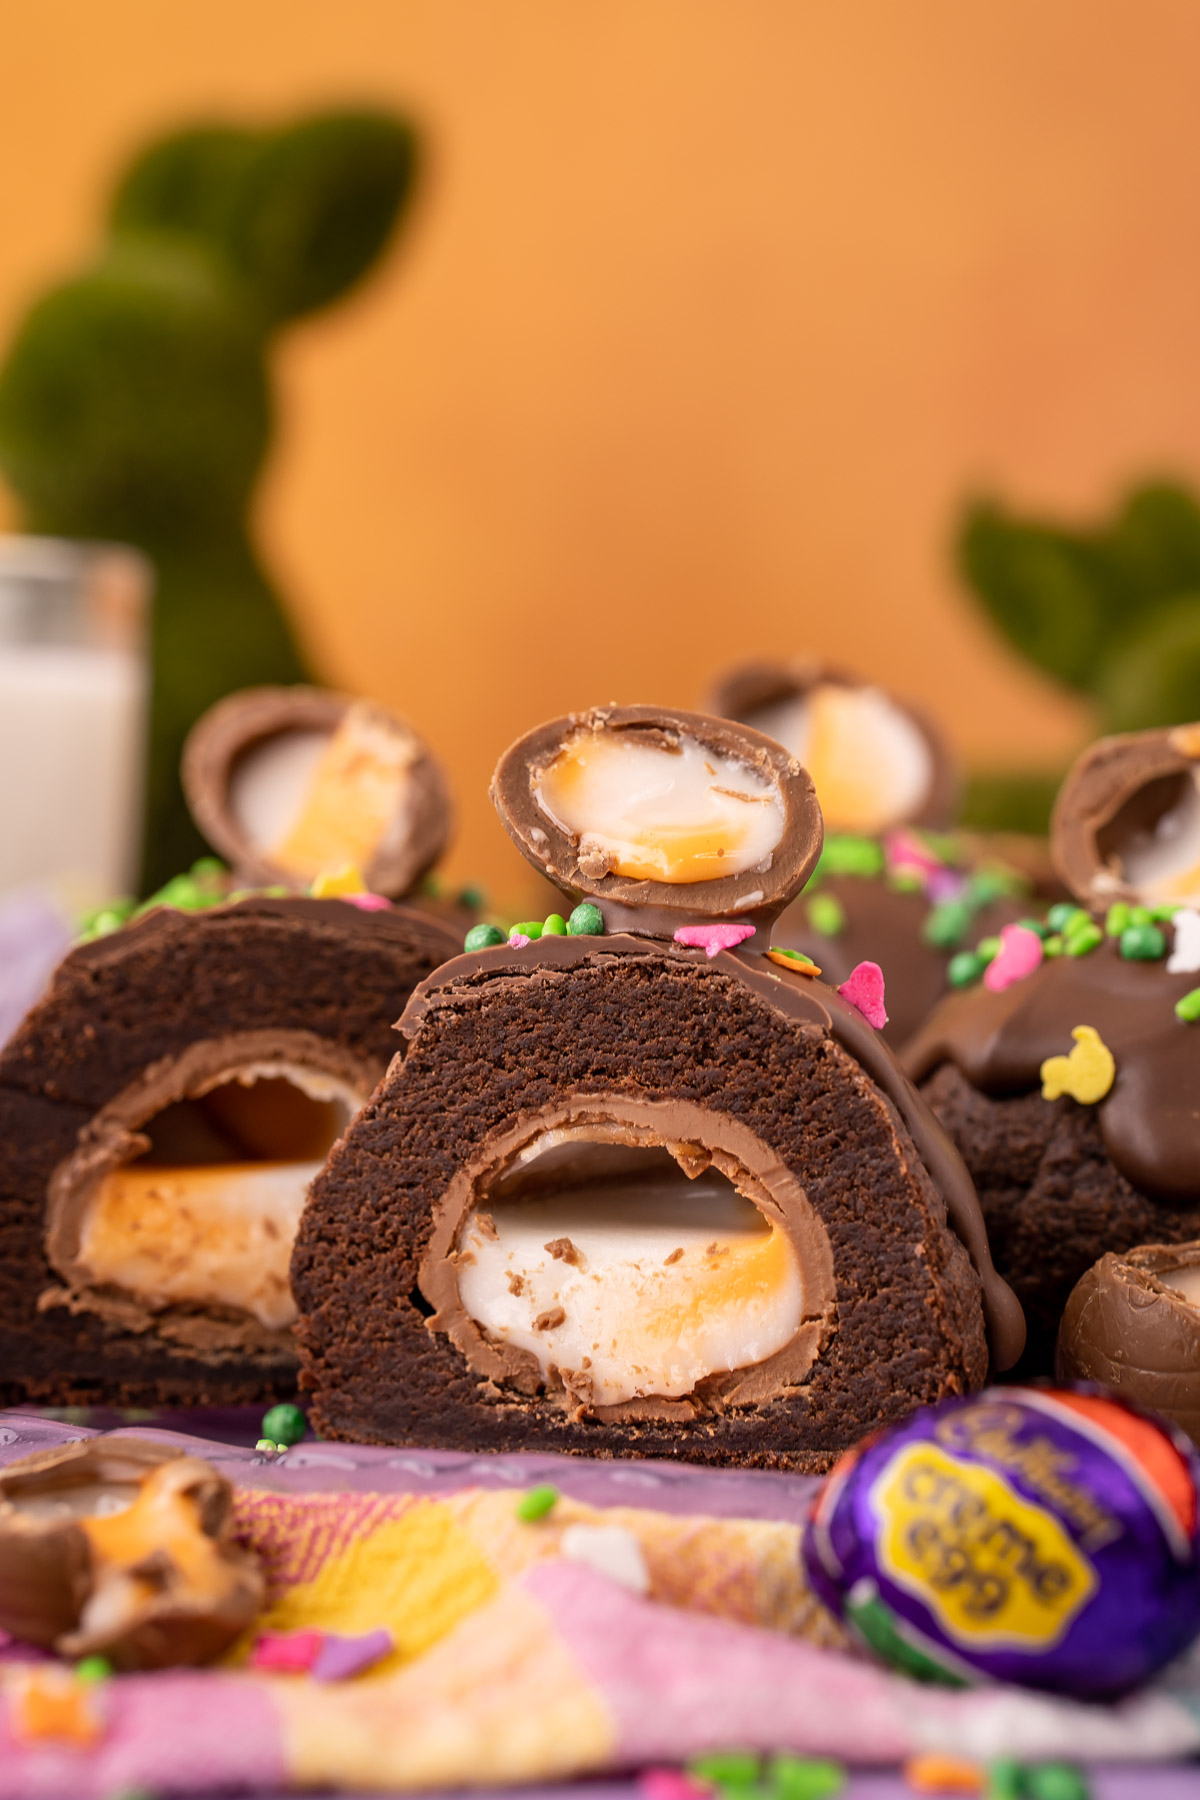 A chocolate cookie stuffed with a Cadbury Creme Egg that's been sliced in half to reveal the inside.